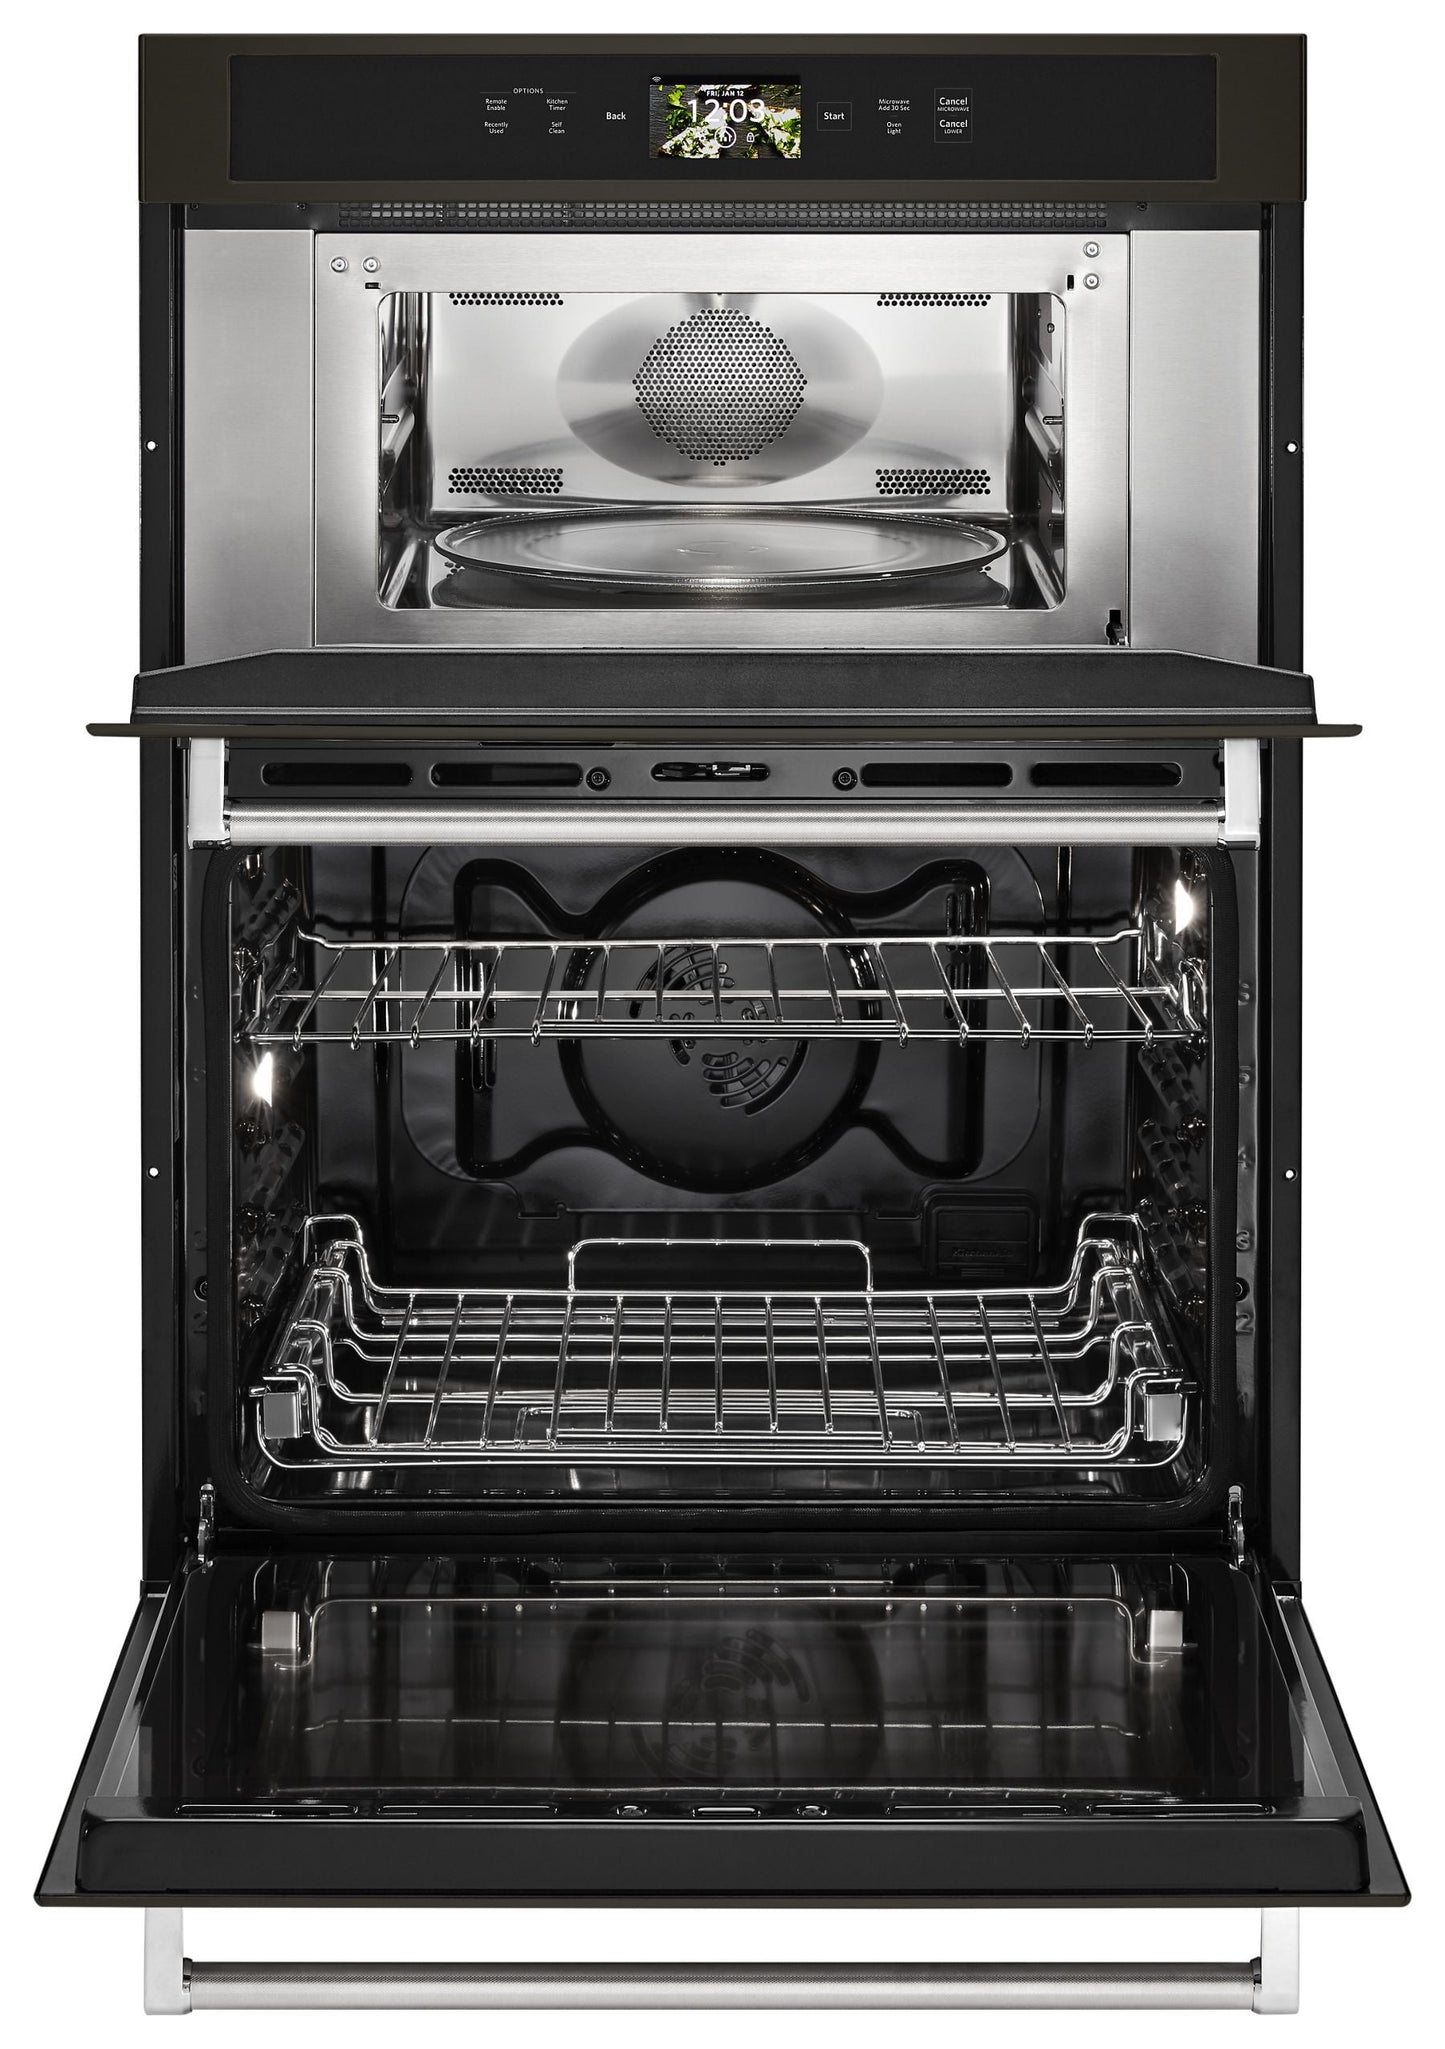 Kitchenaid KOCE900HBS Smart Oven+ 30" Combination Oven With Powered Attachments And Printshield&#8482; Finish - Black Stainless Steel With Printshield&#8482; Finish